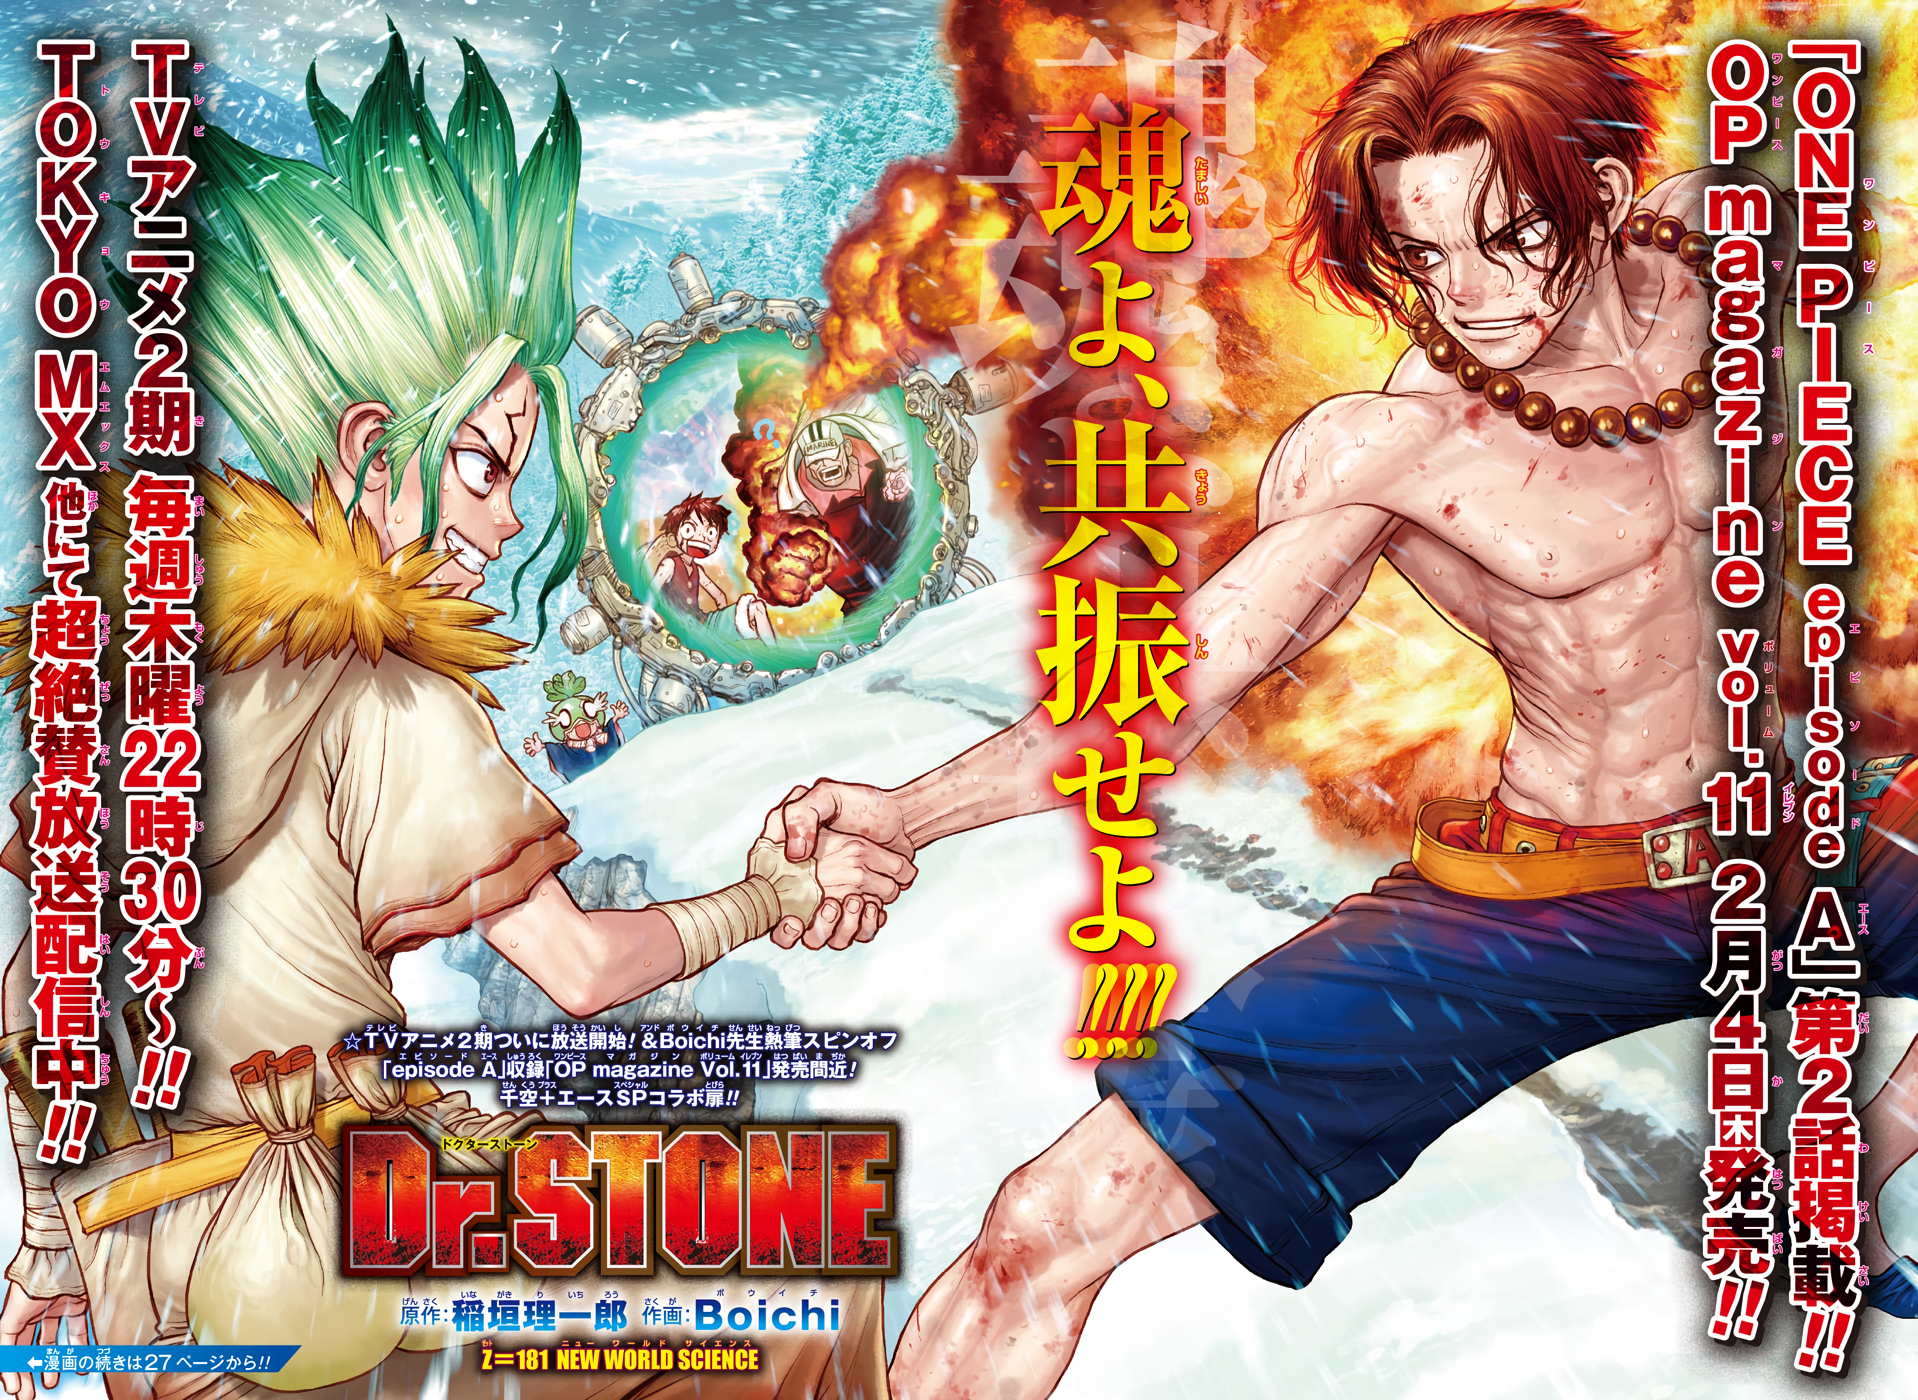 Dr. Stone New World part 1.